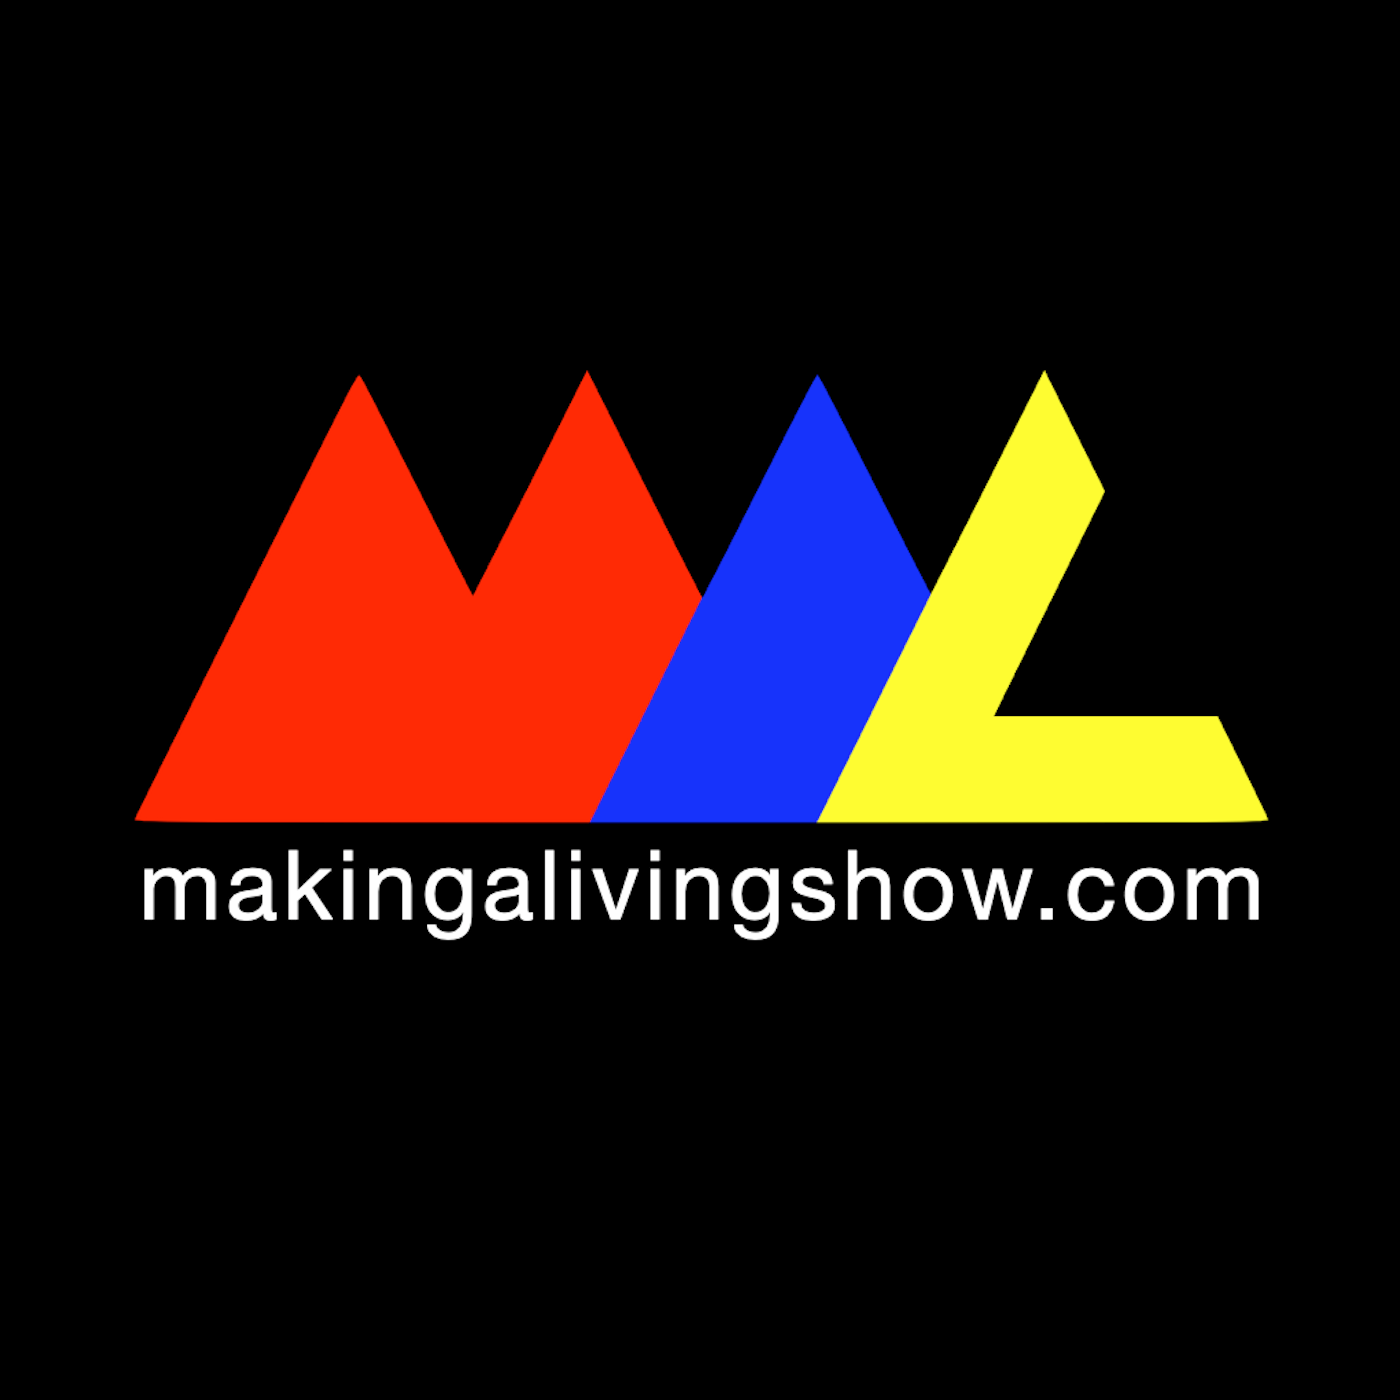 Making A Living Show Podcast Interview: Episode 10 - Urban Minimalist